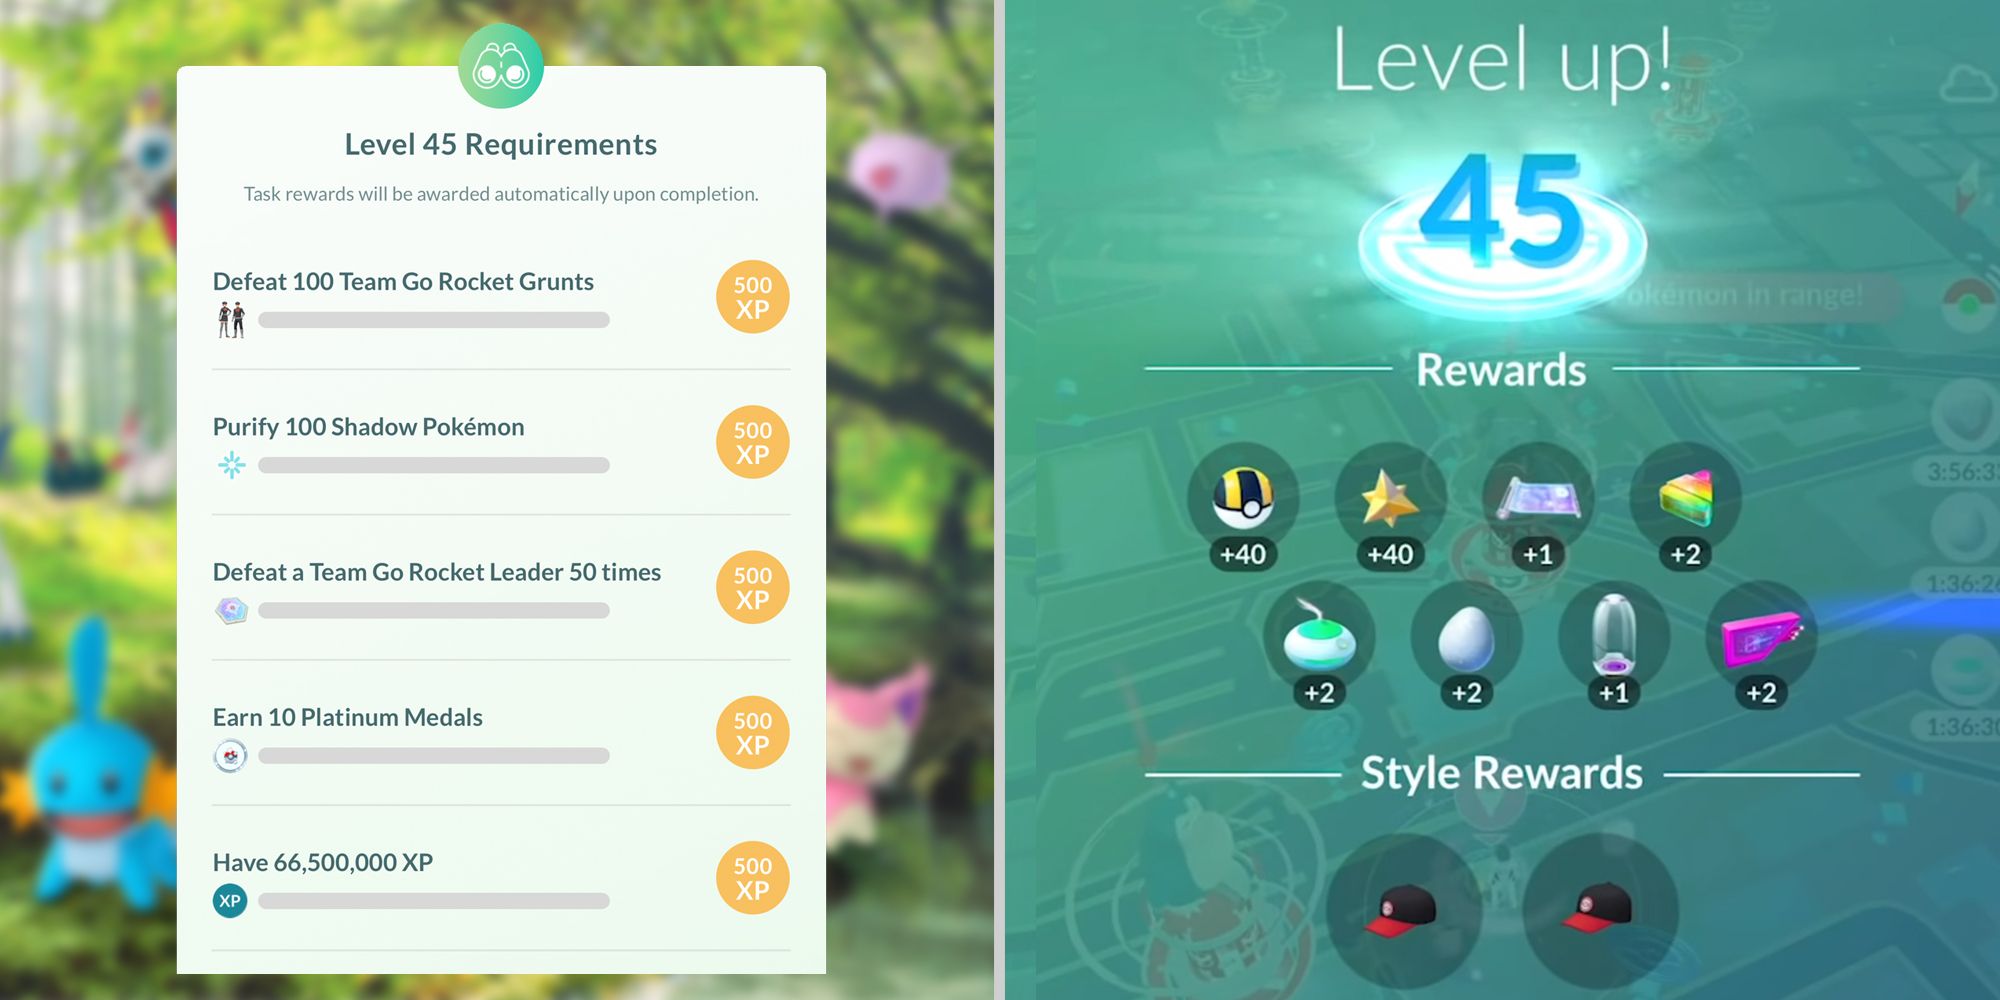 Requirements and rewards for level 45 in Pokemon Go